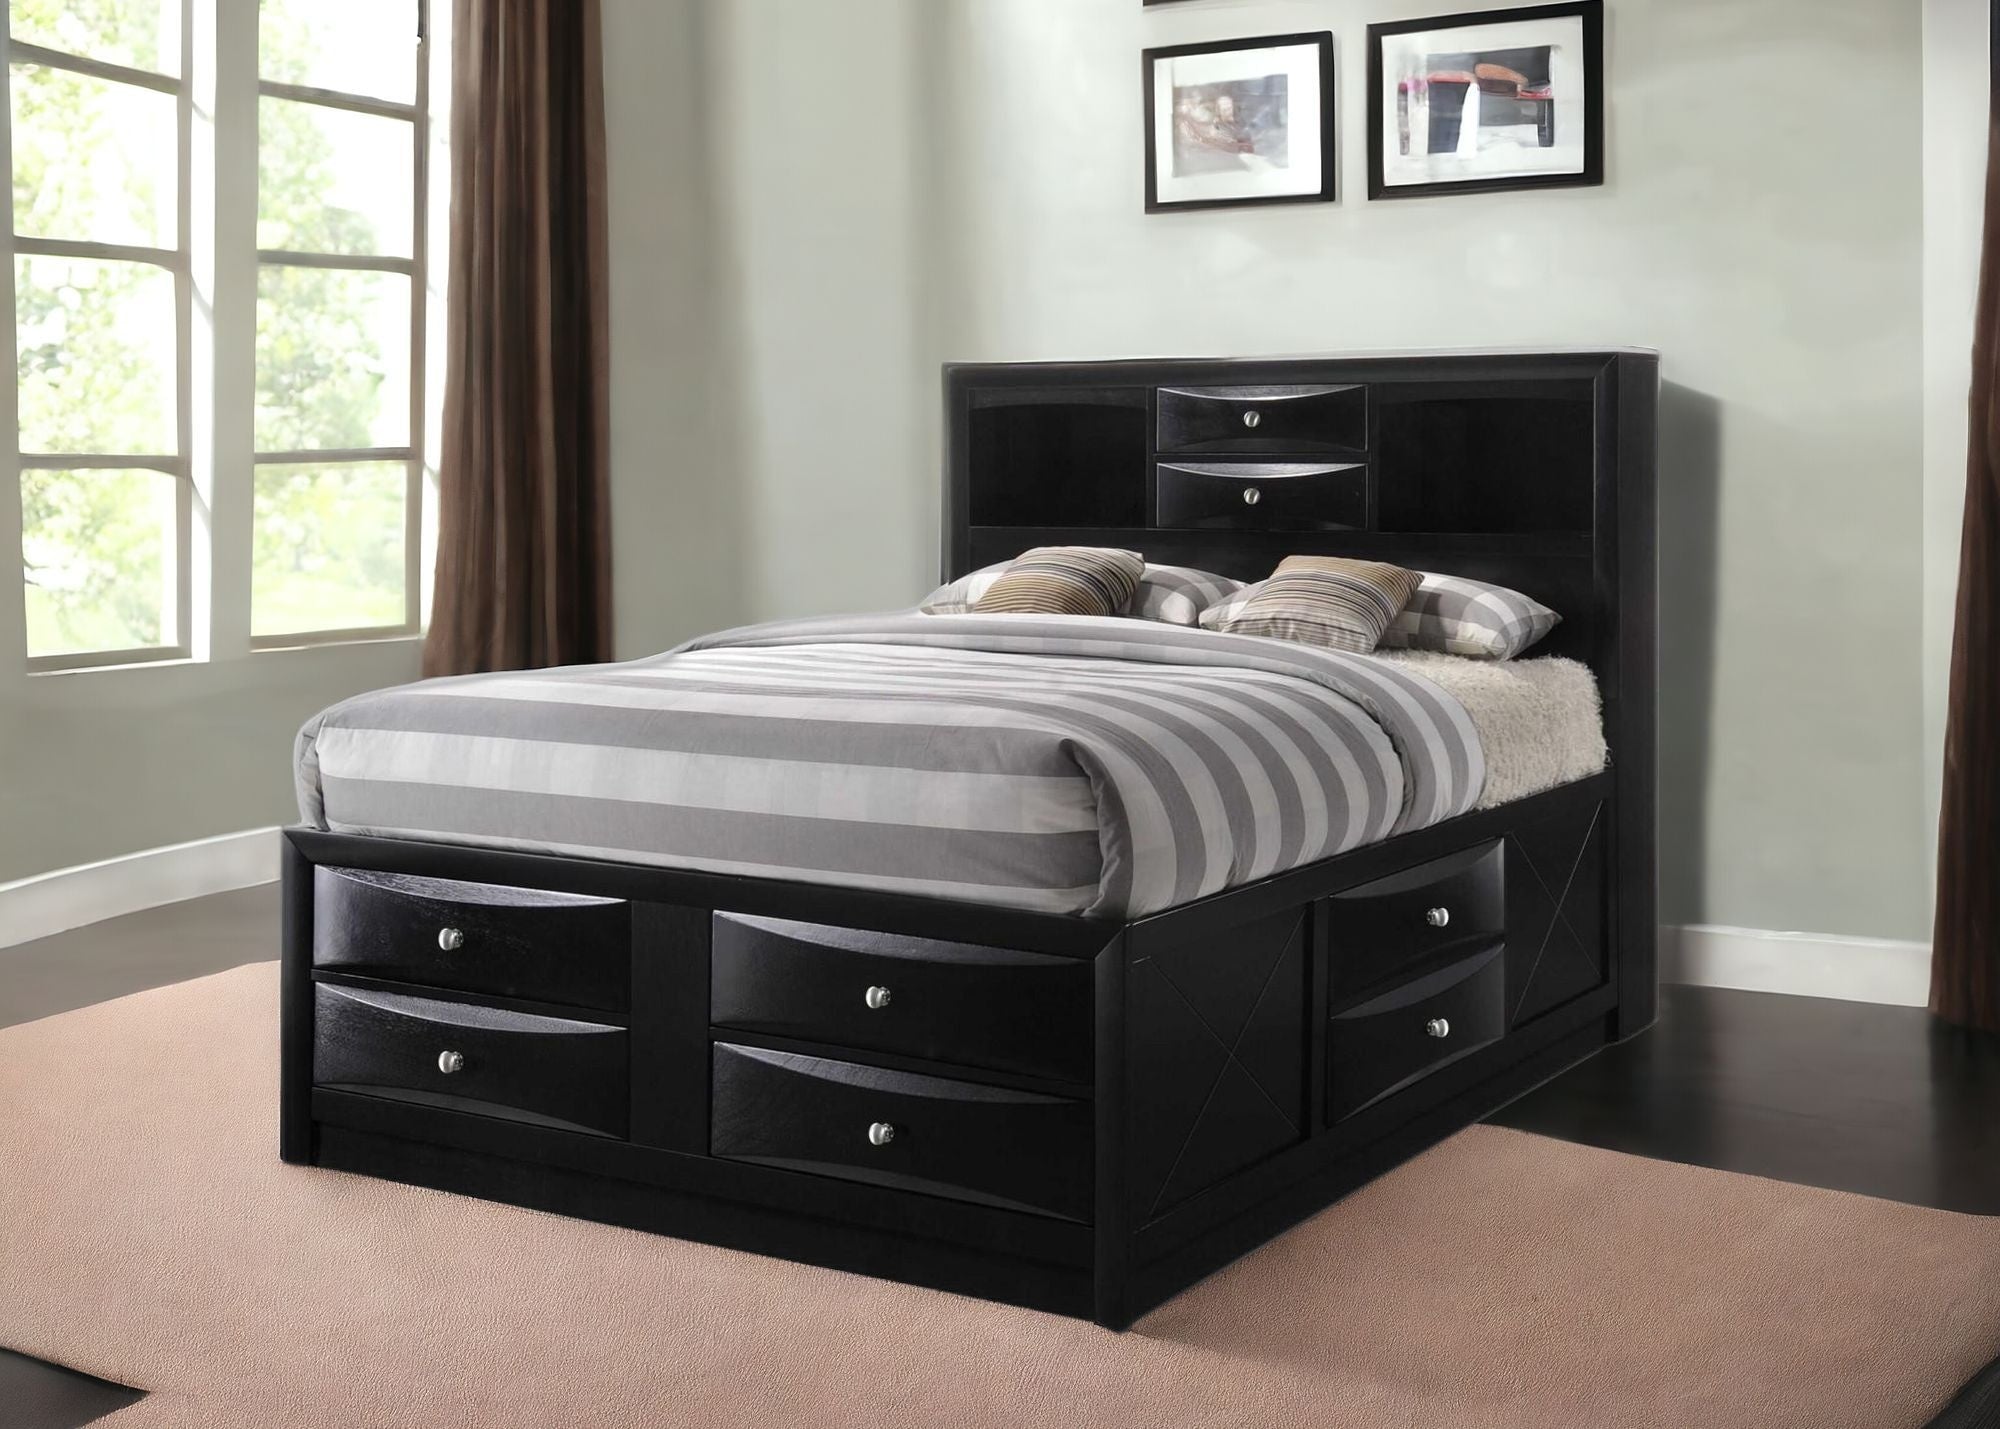 Black Multi-Drawer Queen Bed With Bookcase Headboard